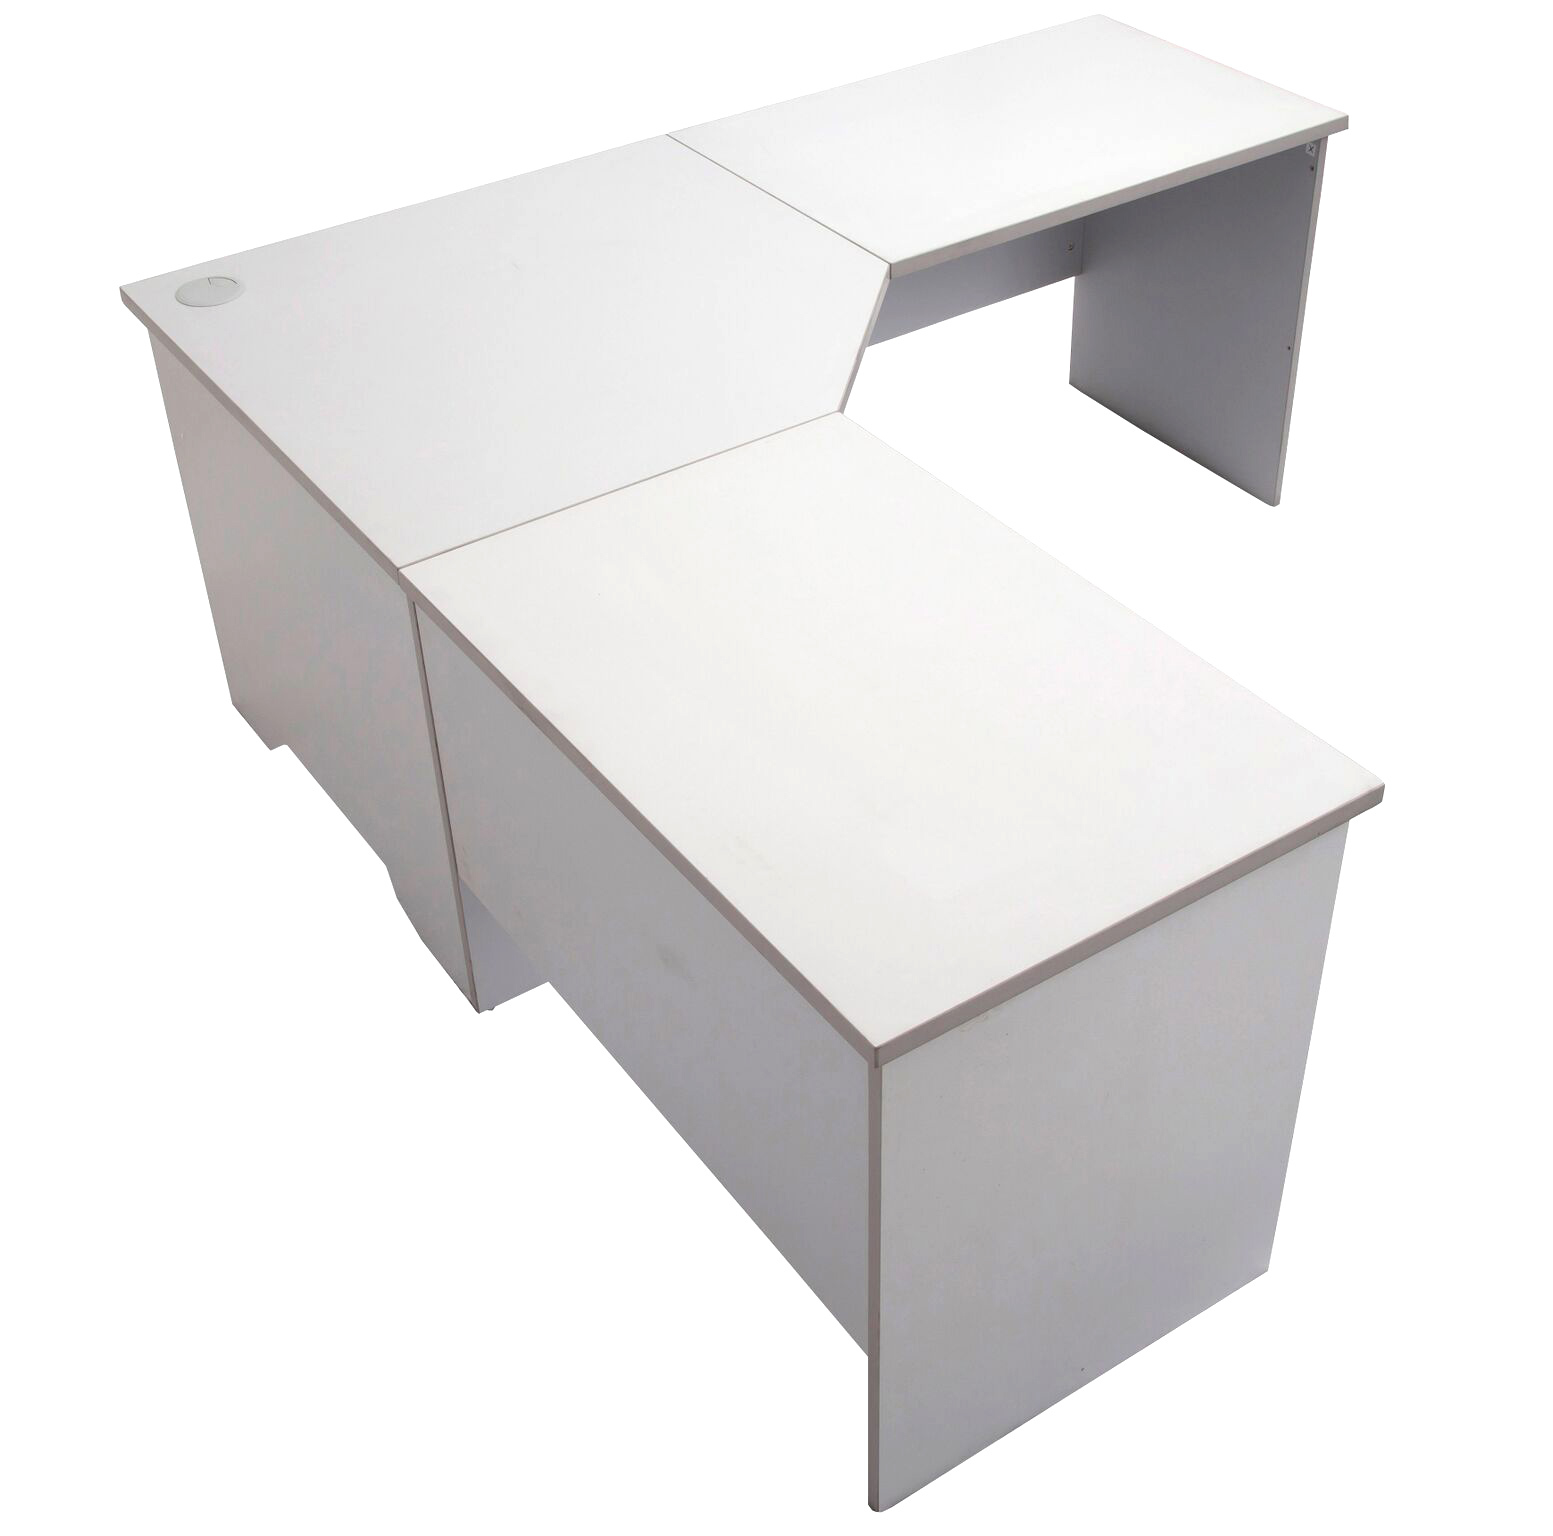 Minimalist Corner Desks For Sale Near Me with Wall Mounted Monitor